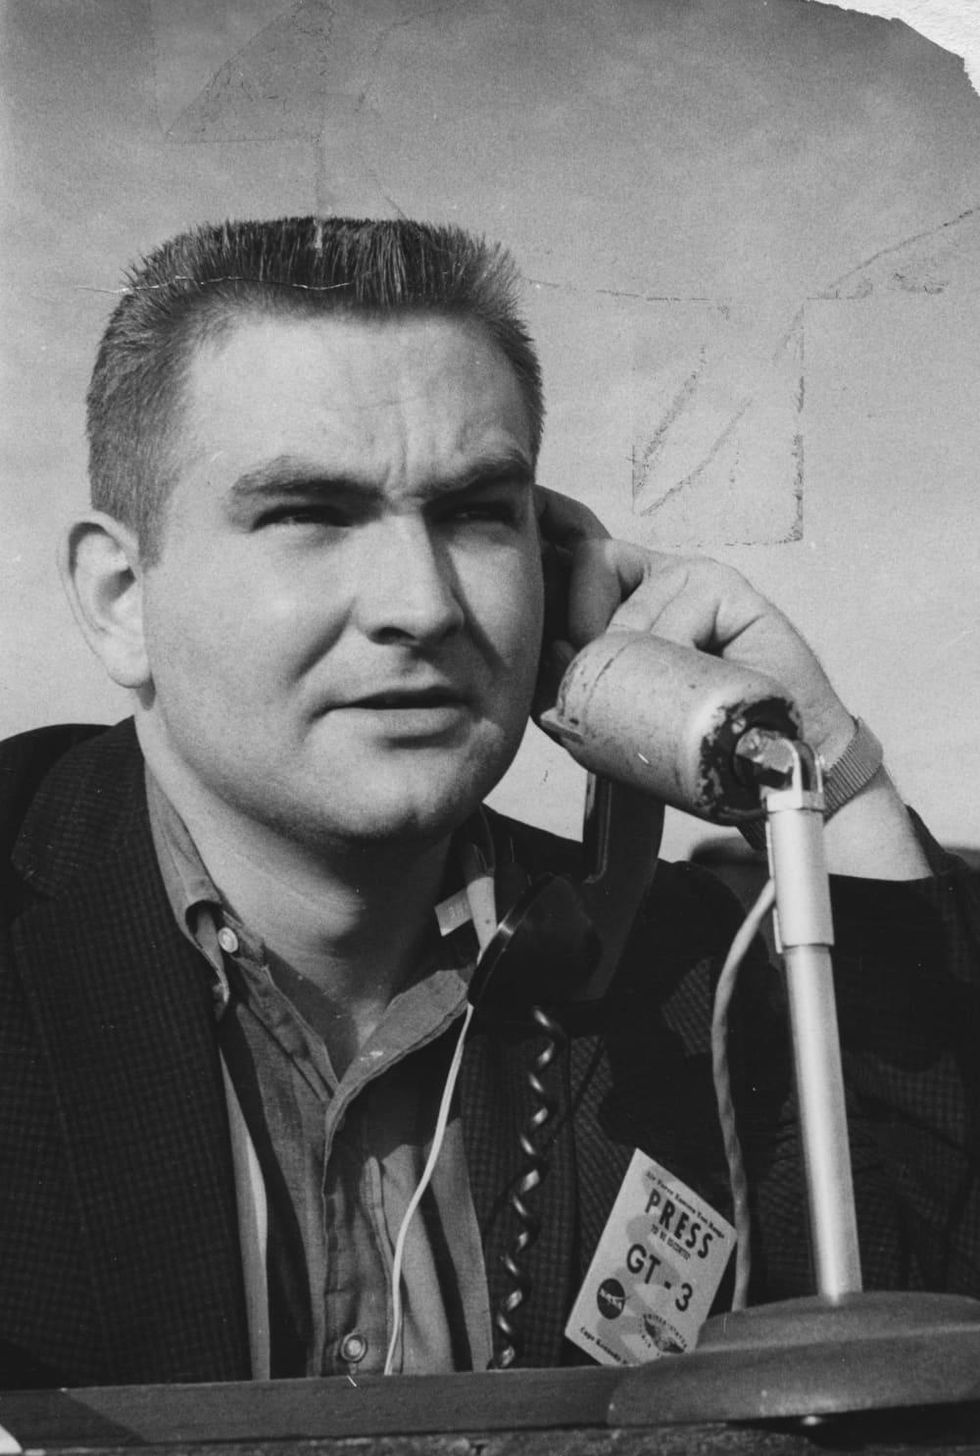 Dave Ward covering the Gemini 3 Mission in March, 1965